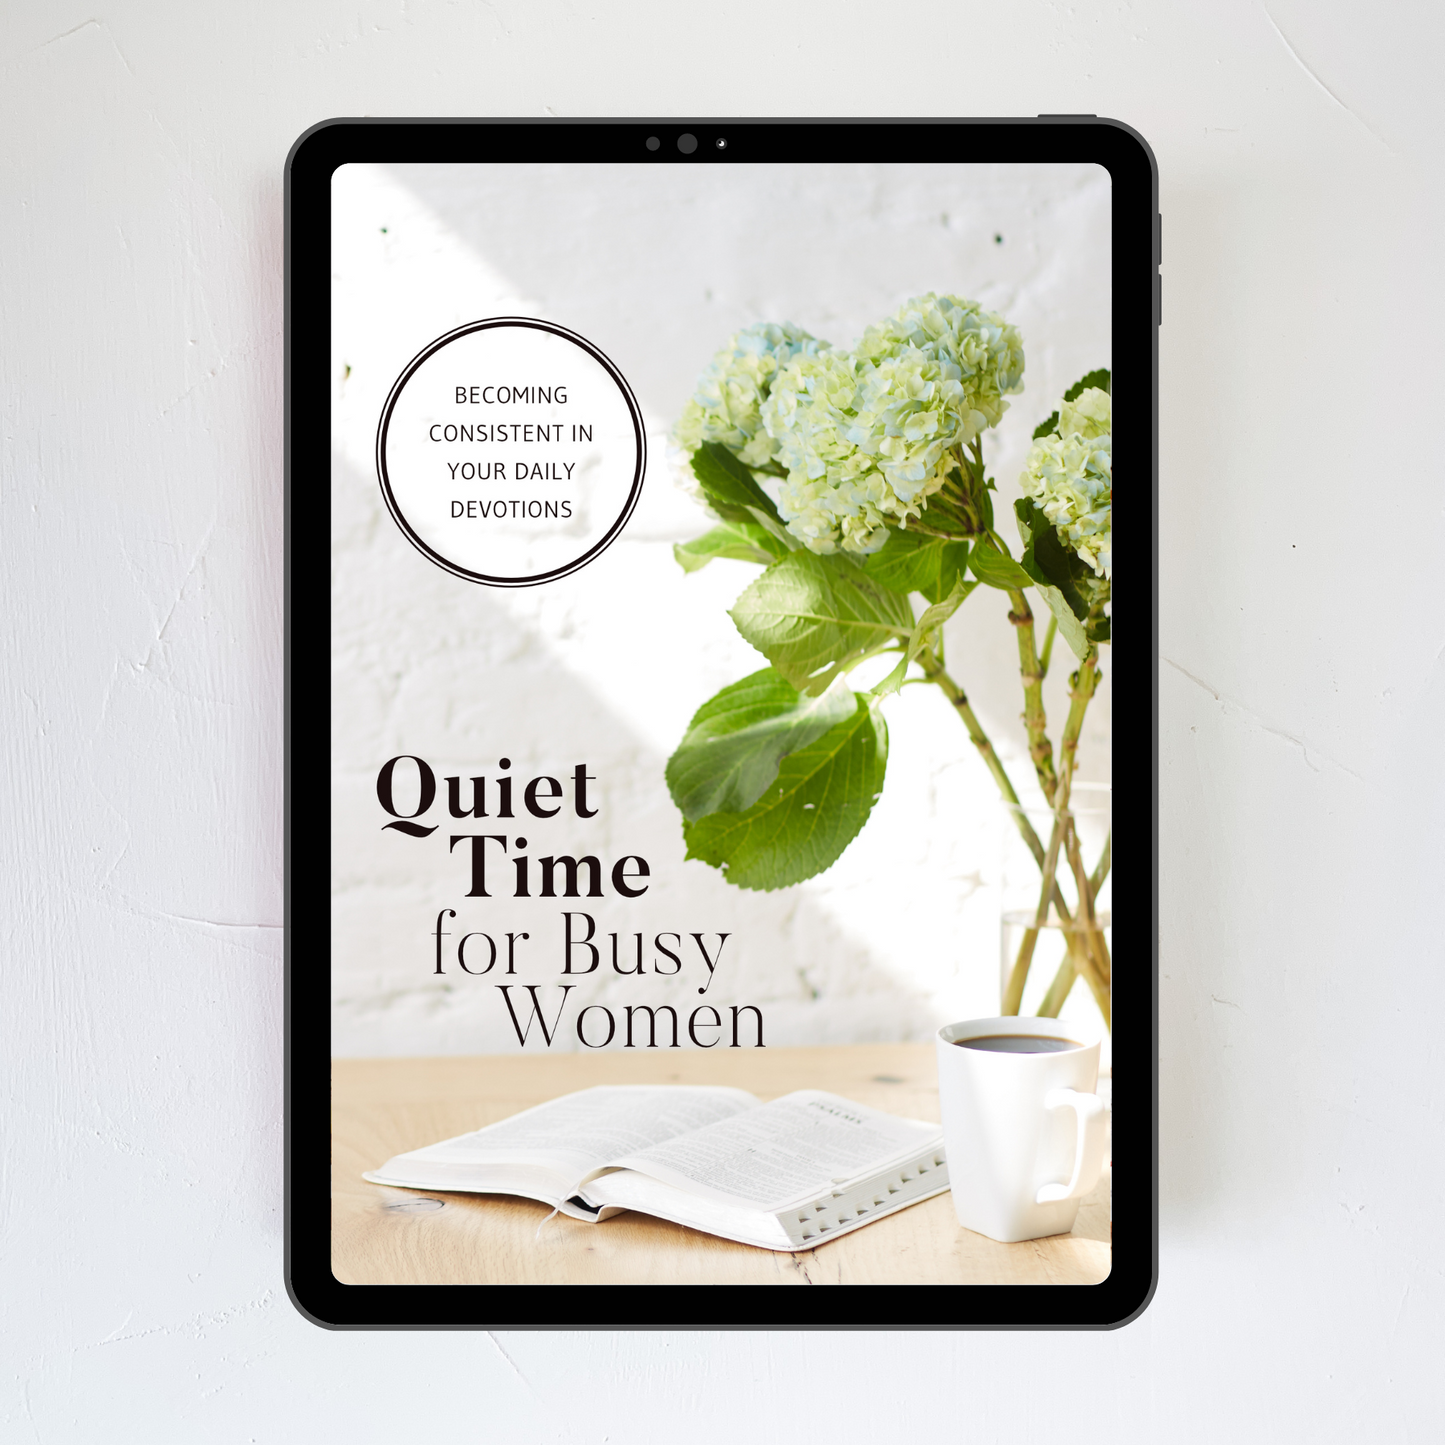 Quiet Time for Busy Women Ebook